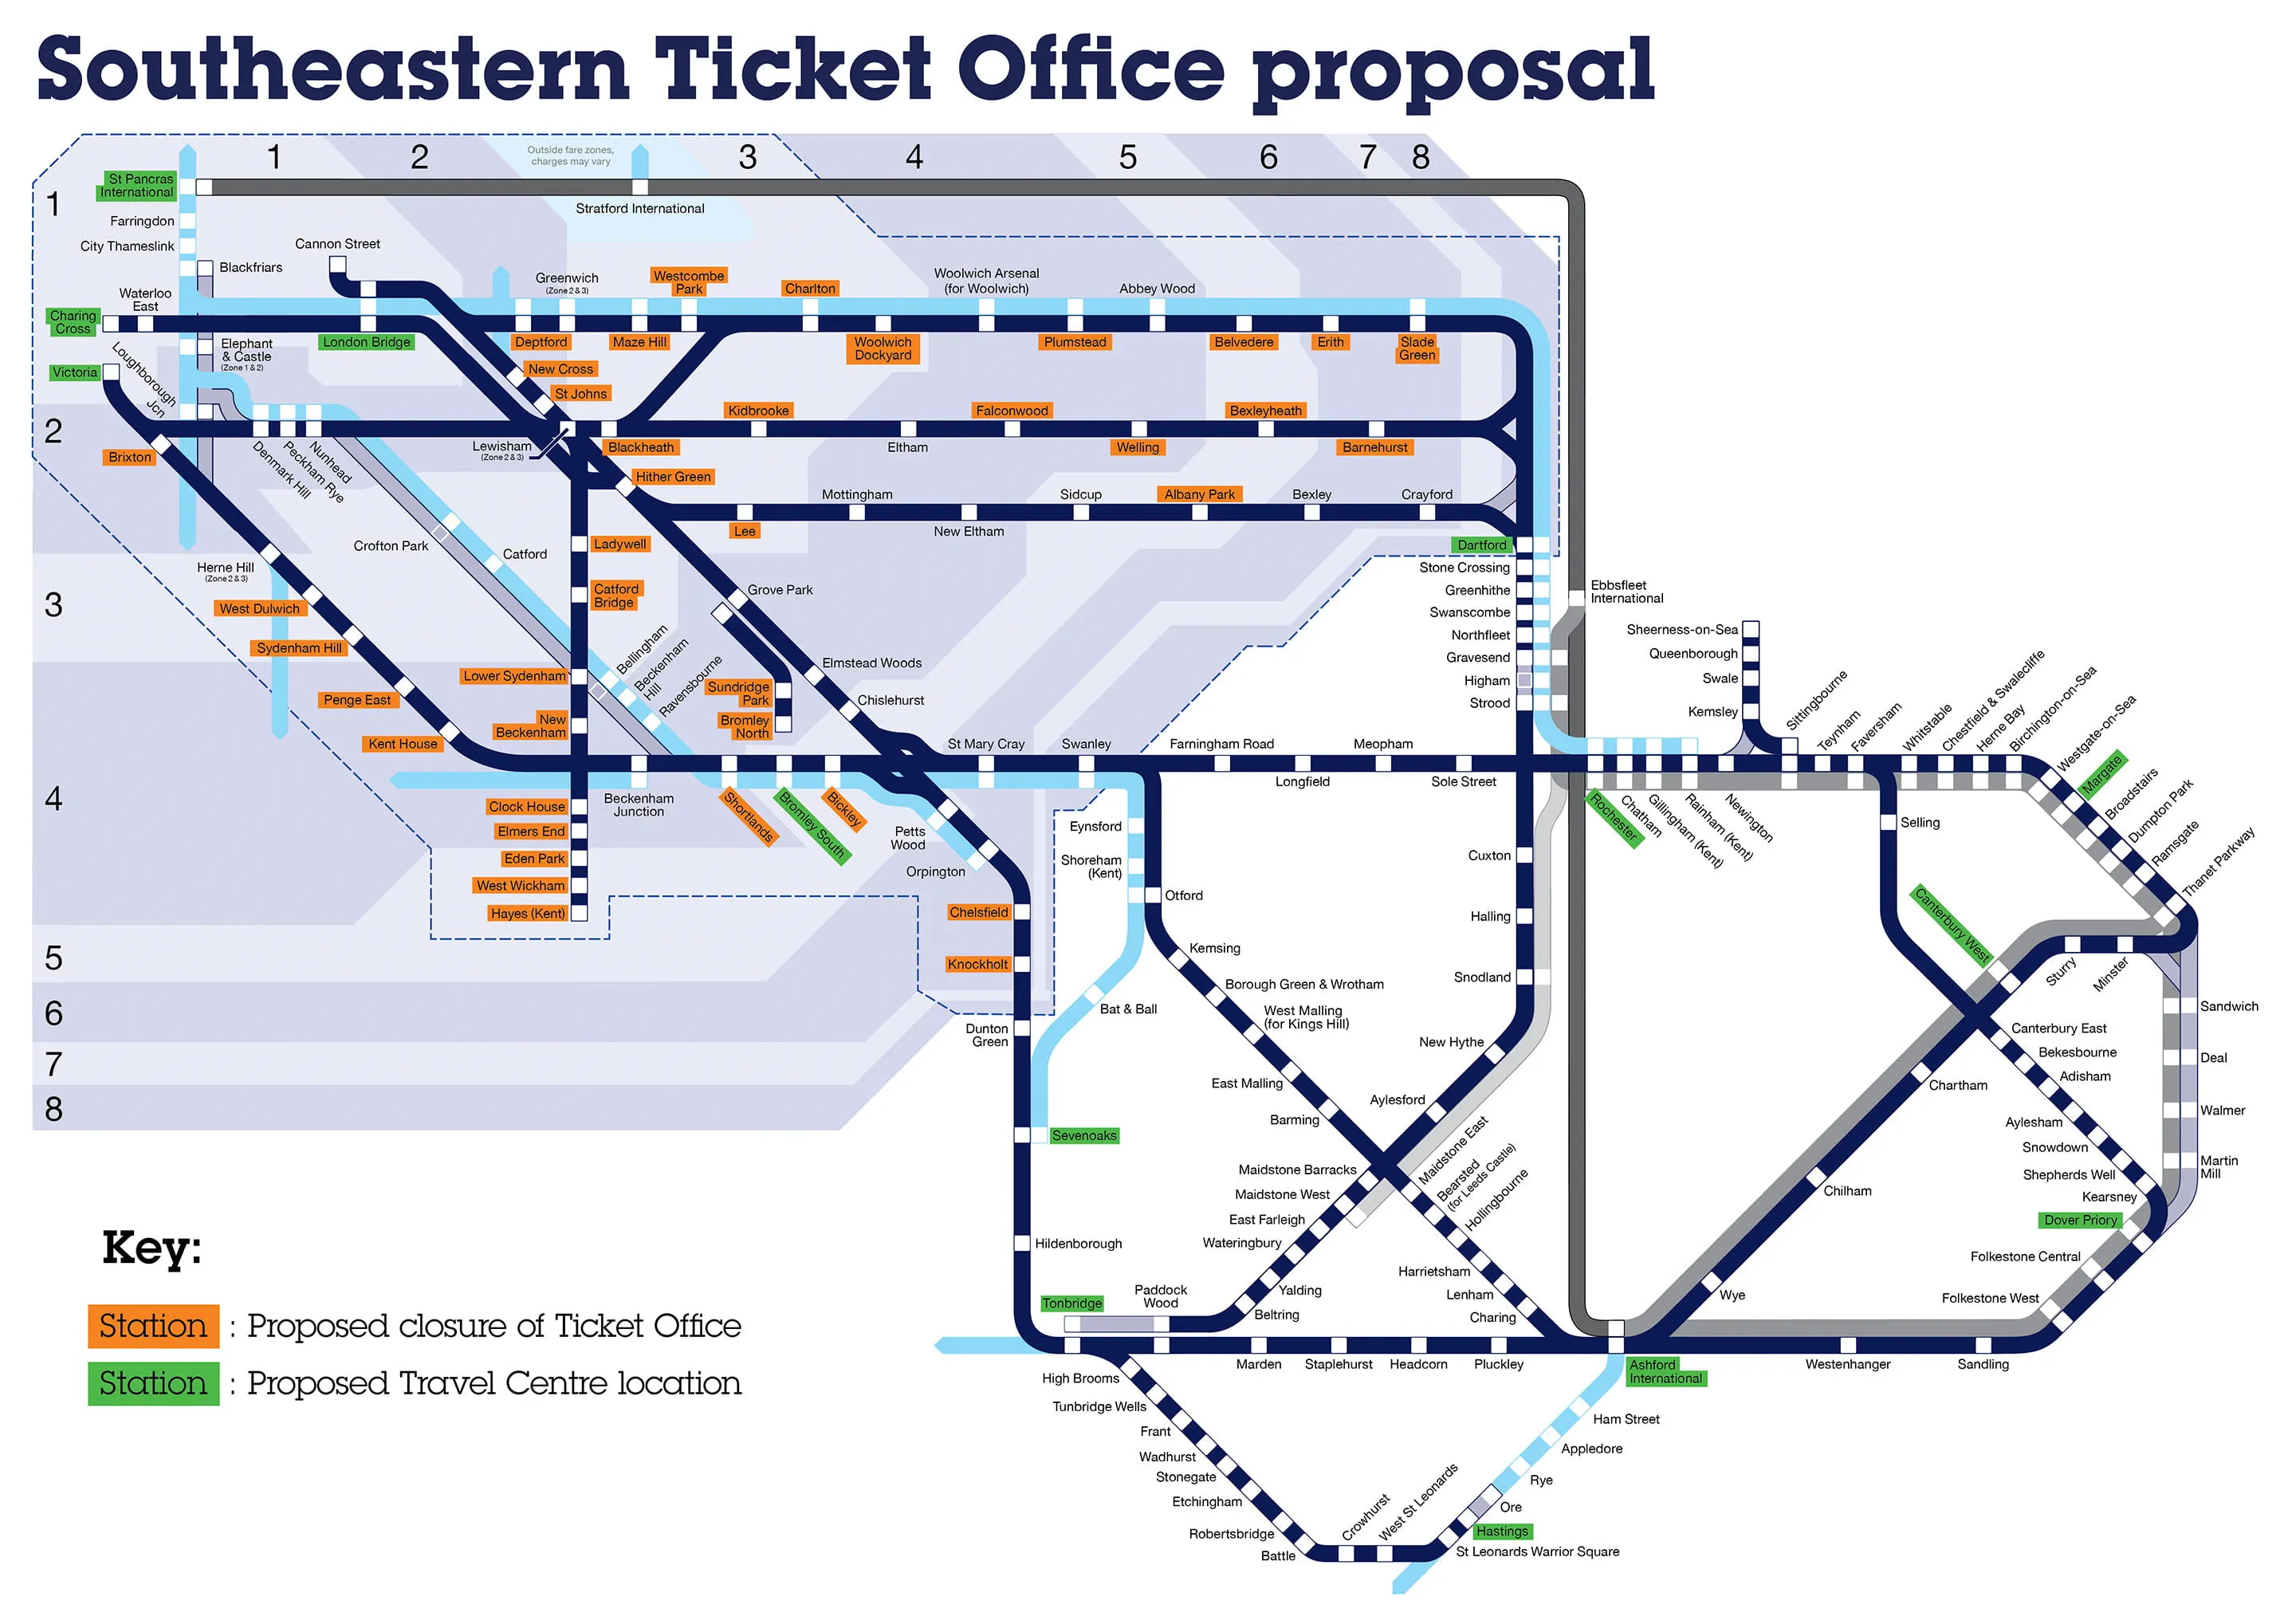 Ticket Office Consultation map with Travel Centres